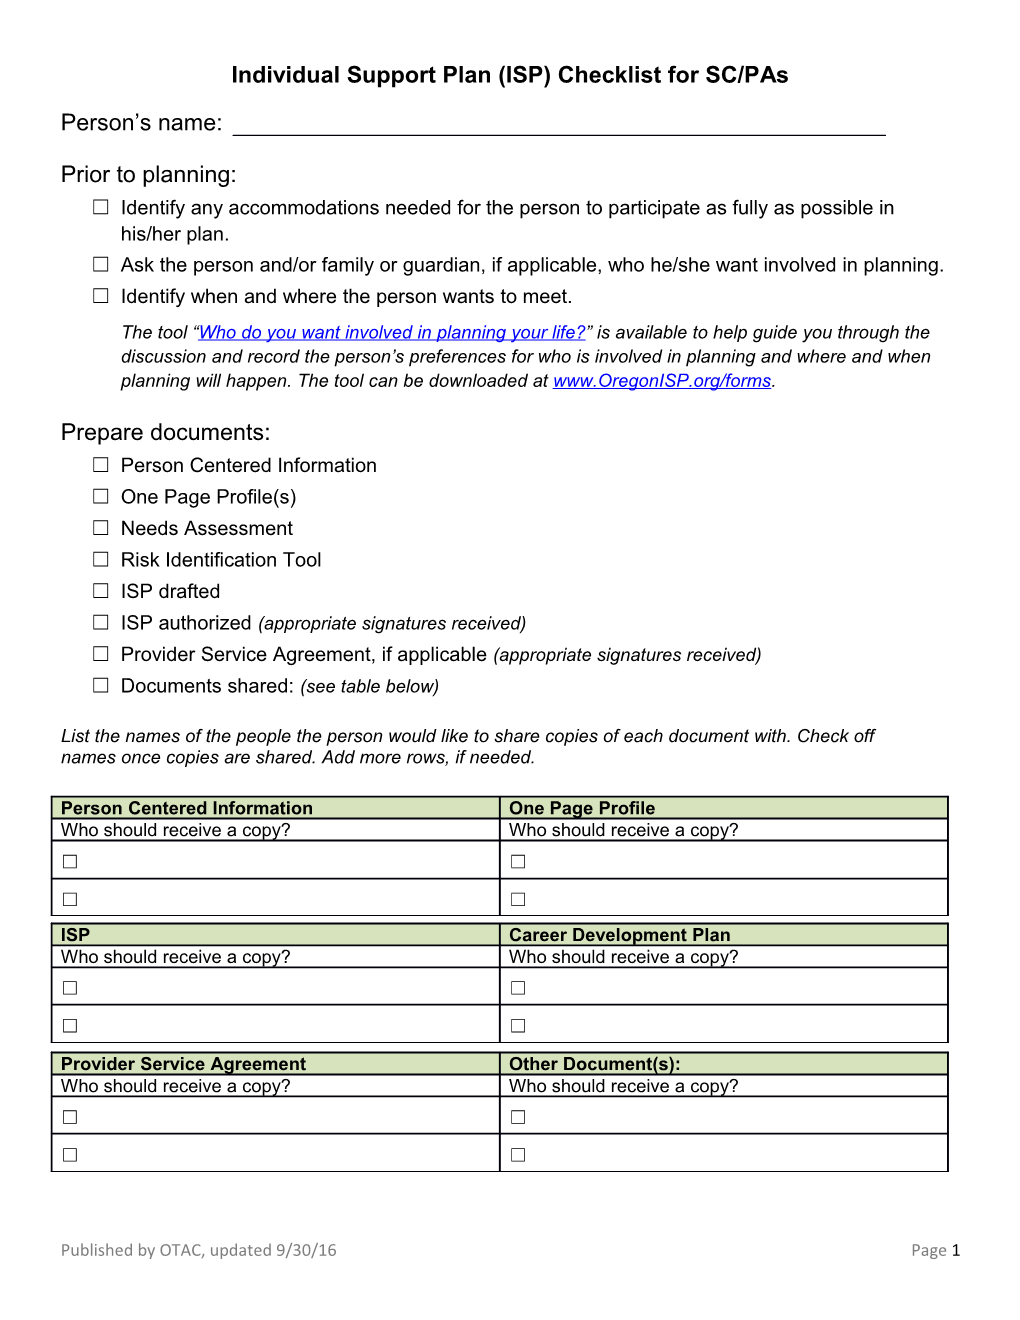 Individual Support Plan (ISP) Checklist for SC/Pas